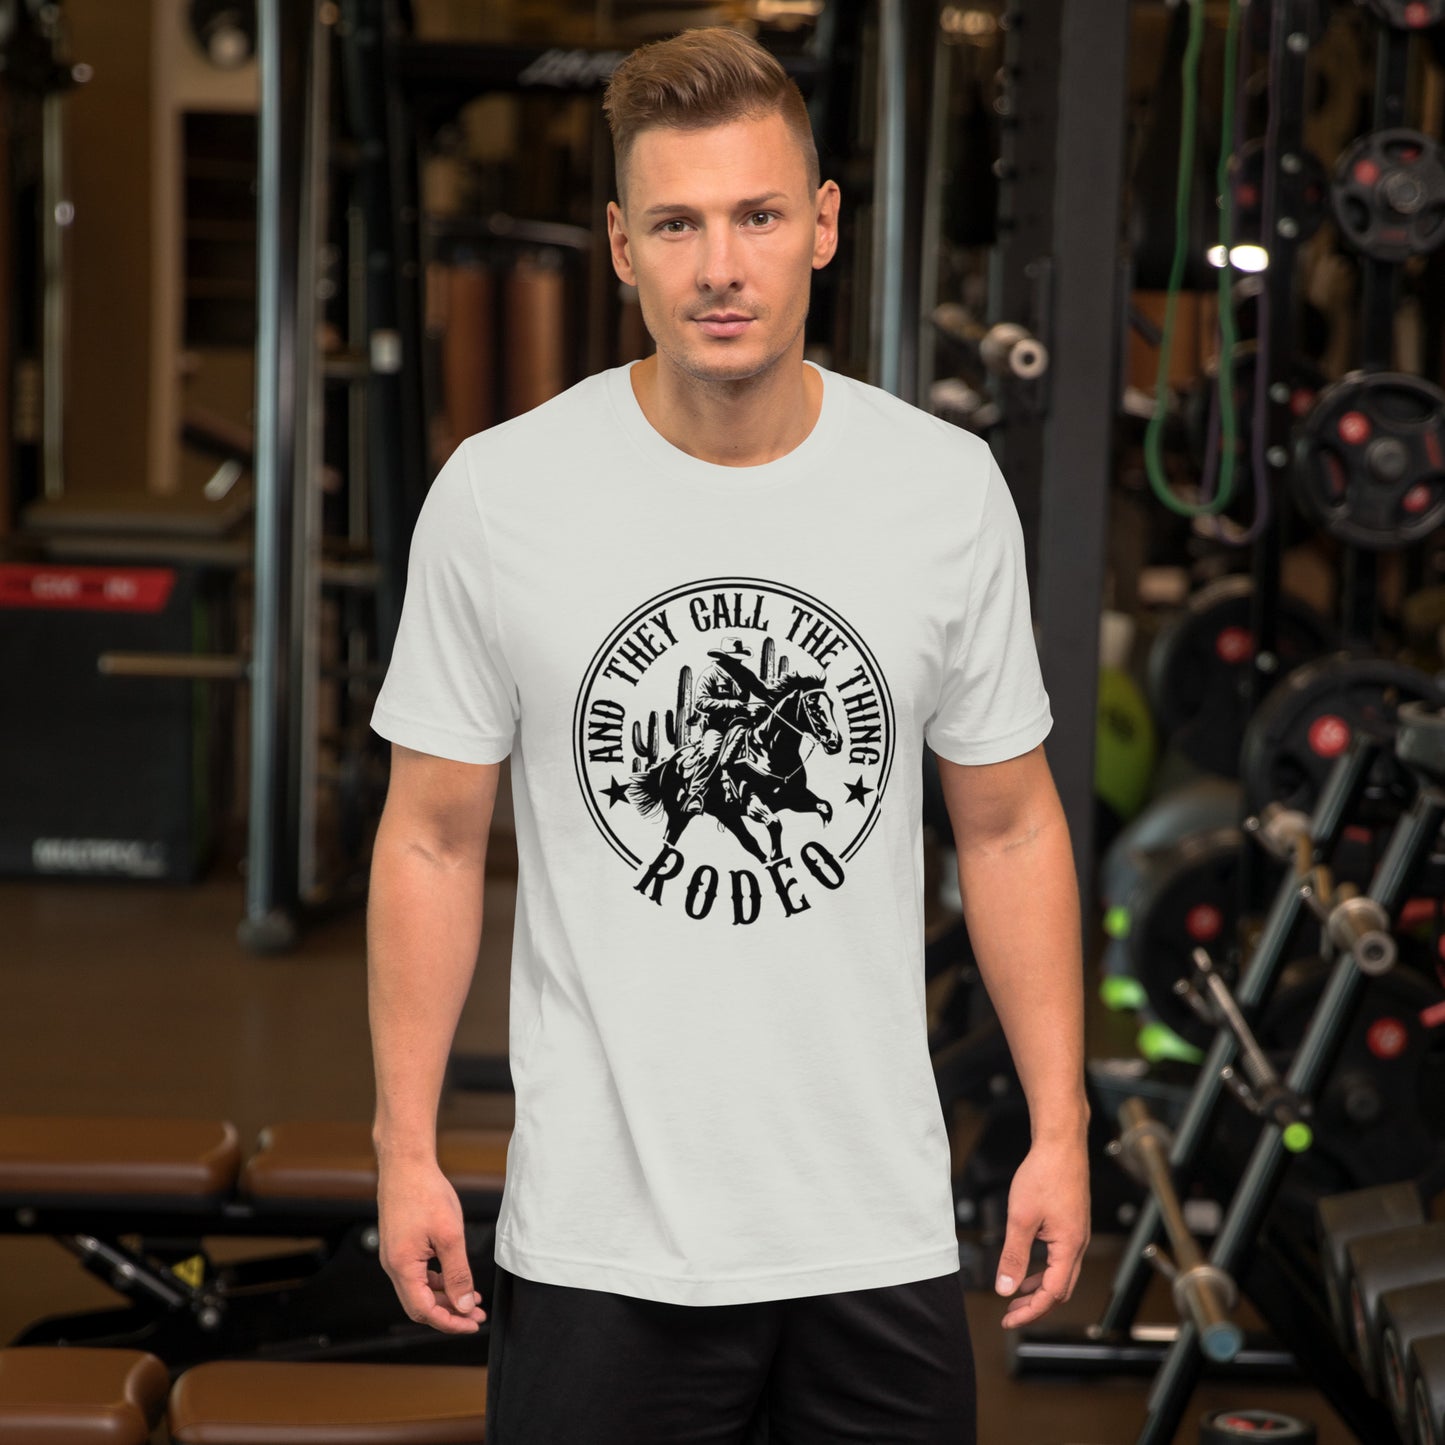 And They Call It Rodeo - Get Your Twang On with Classic Country Tees - The Ultimate Unisex T-Shirt for True Country Souls! - Classic Country Tees